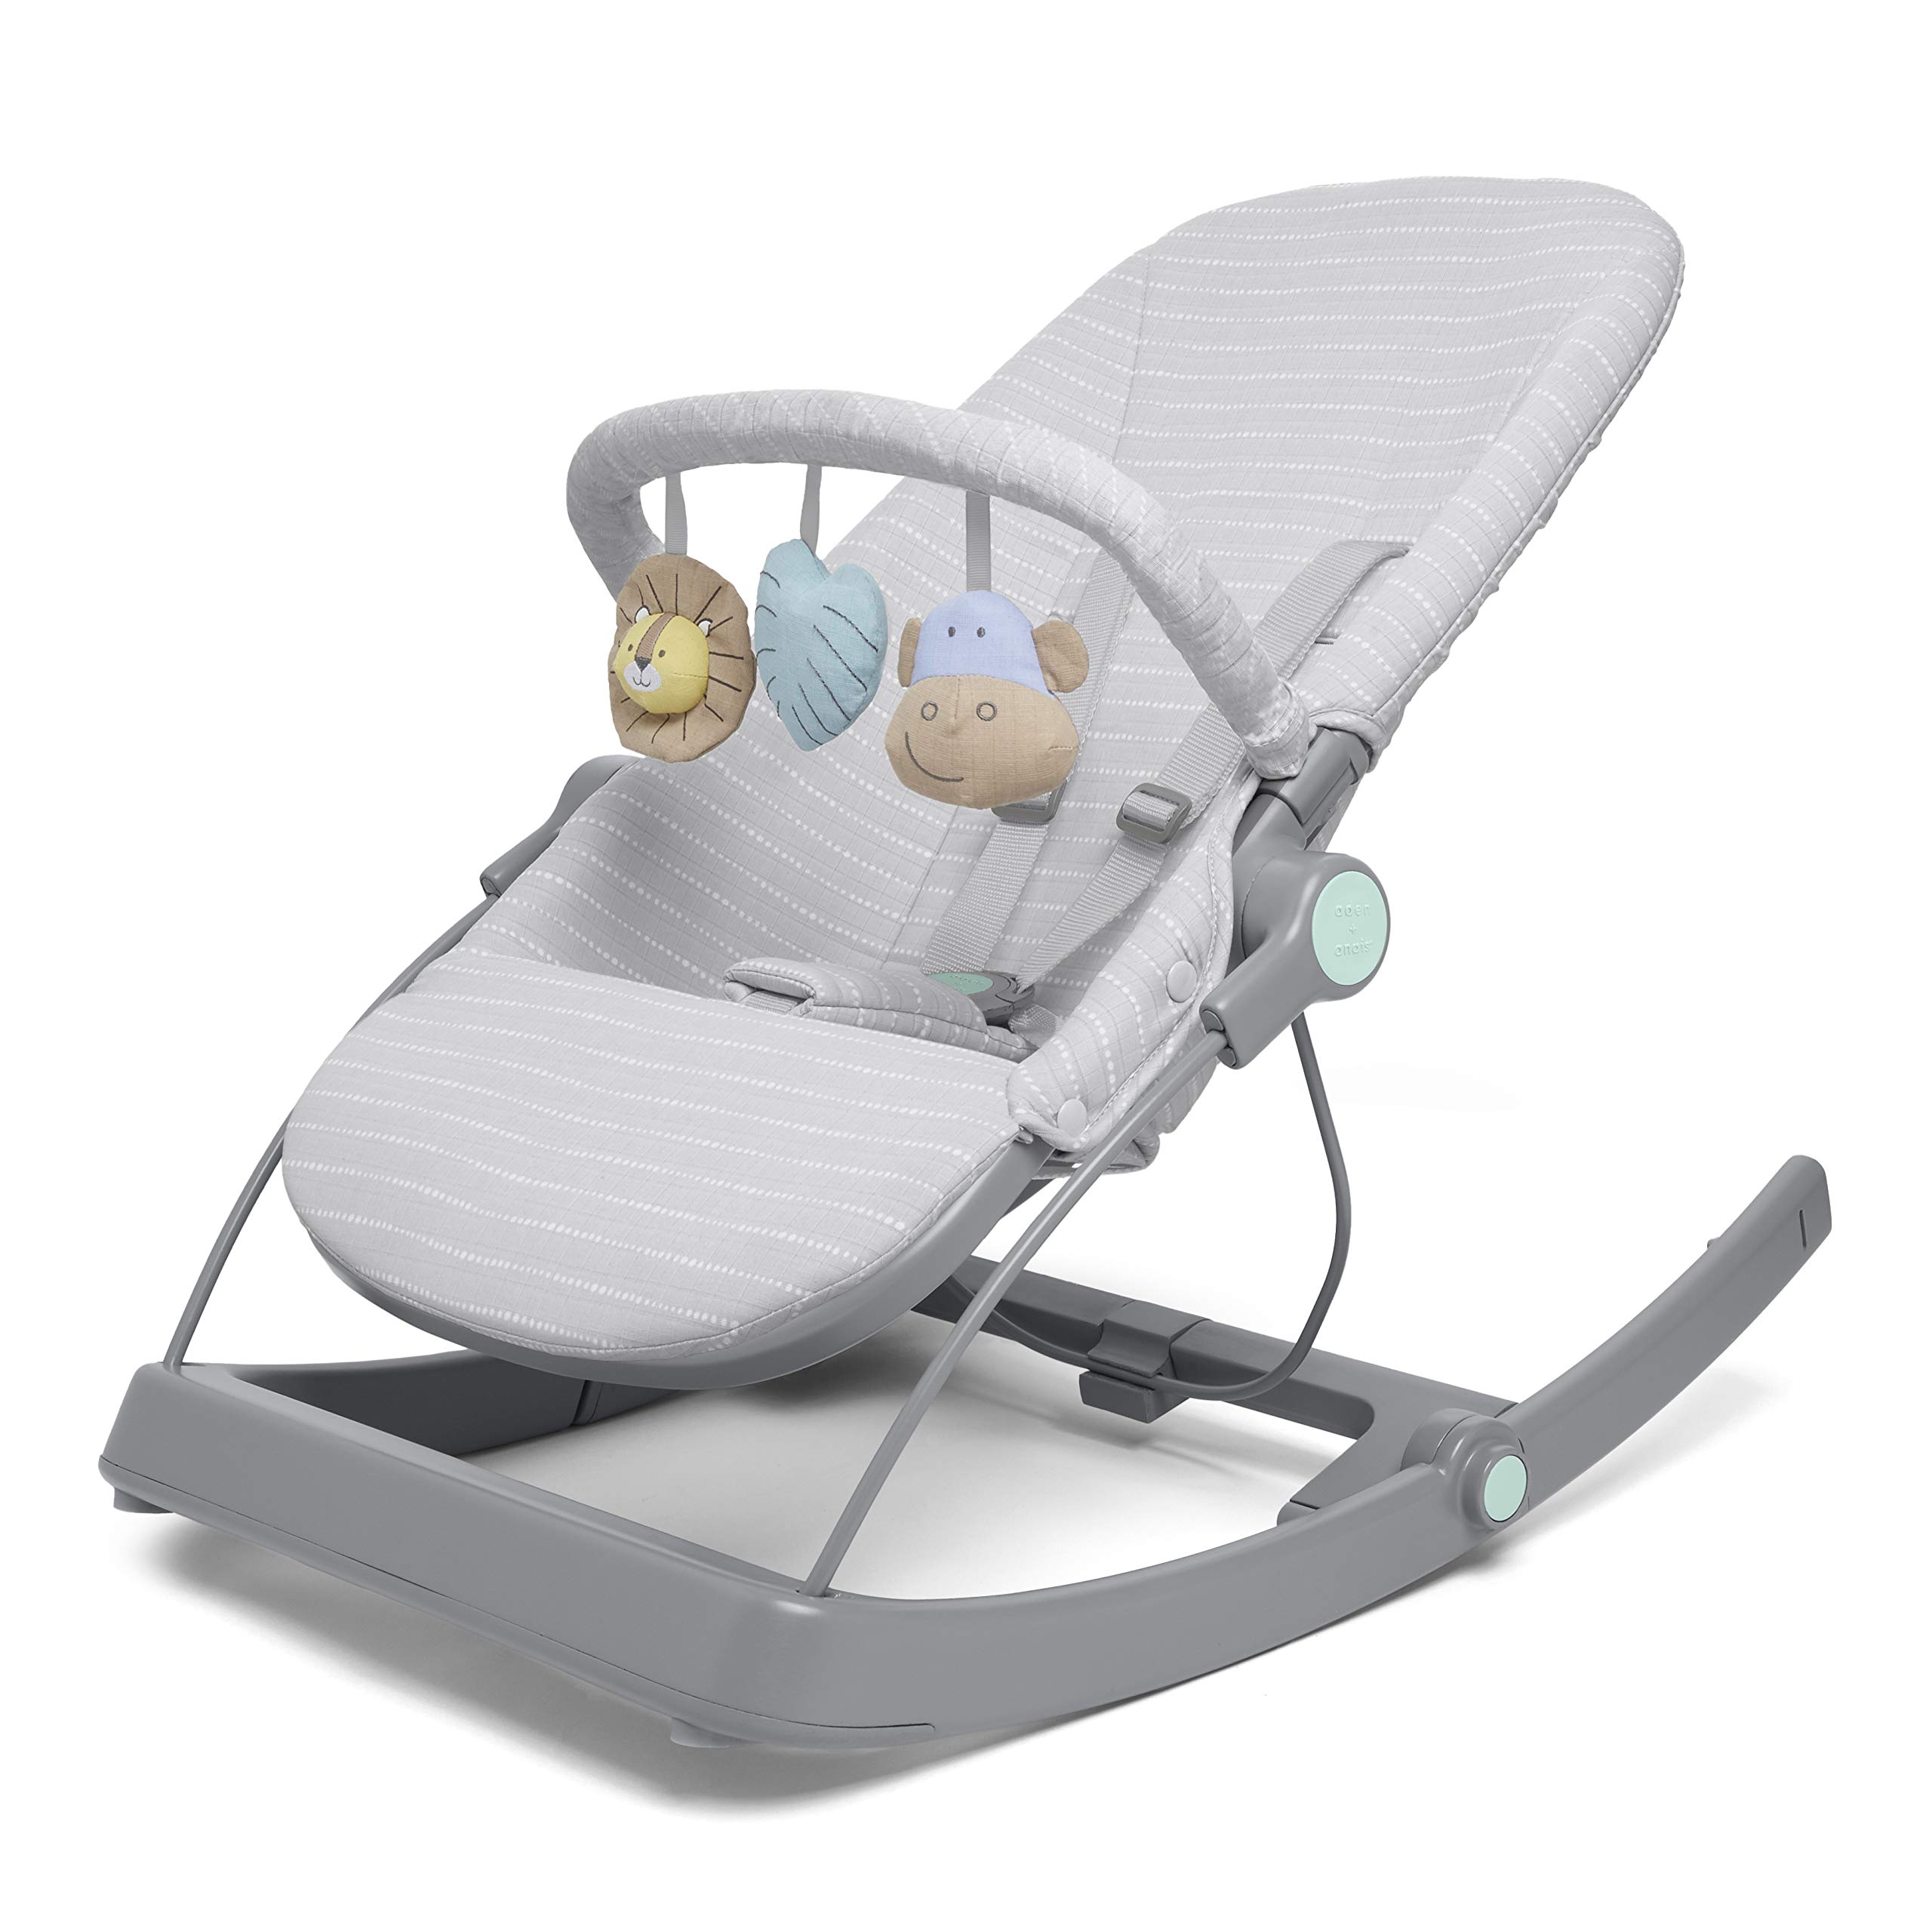 aden + anais 3-in-1 Infant to Toddler Transition Seat and aden + anais Play and Discover Baby Activity Gym, Bundle